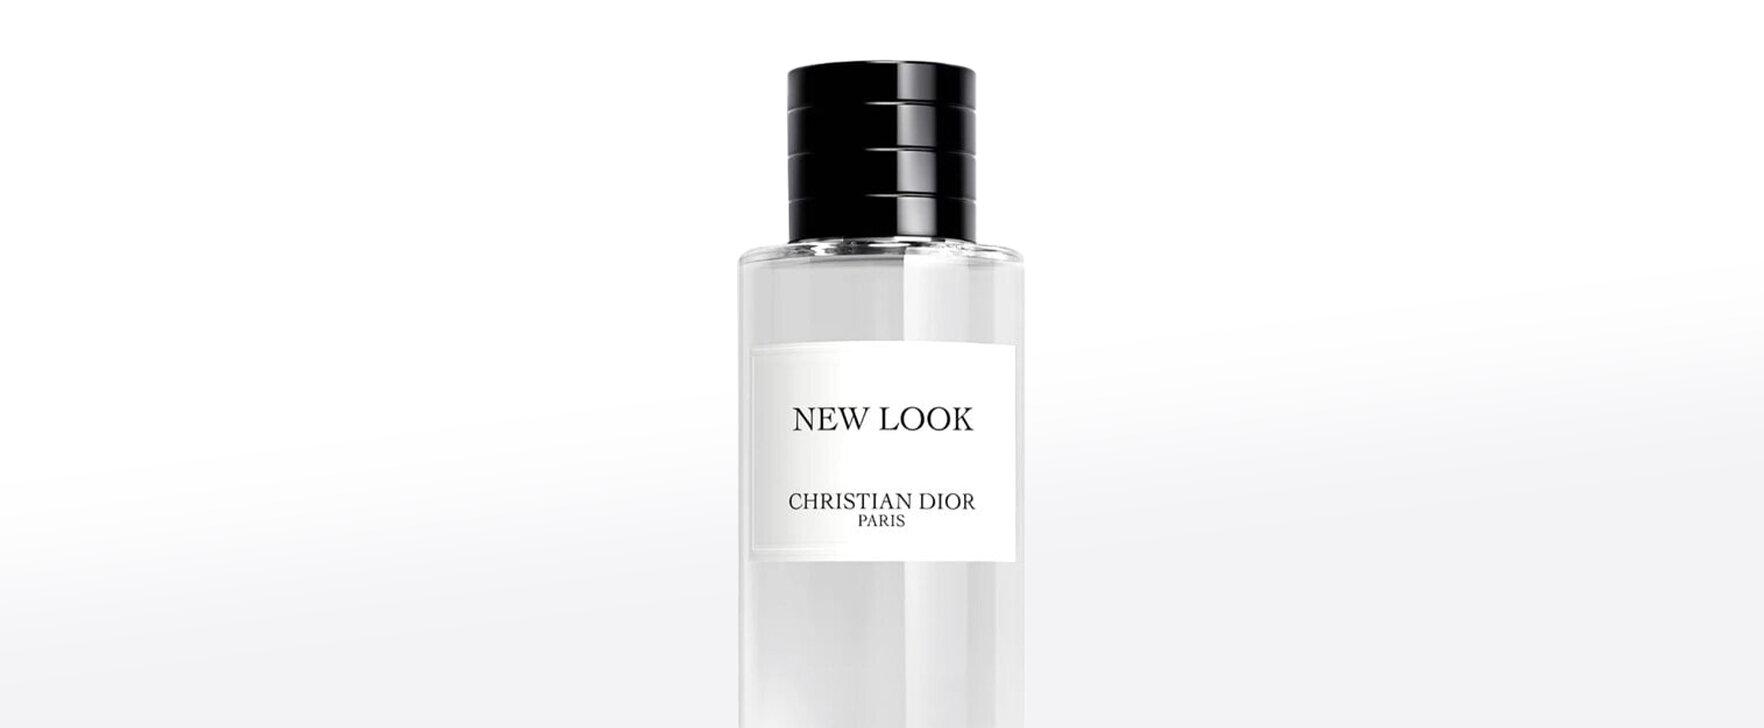 An Ode to the Rebirth of Fashion: The New Eau de Parfum New Look by Dior